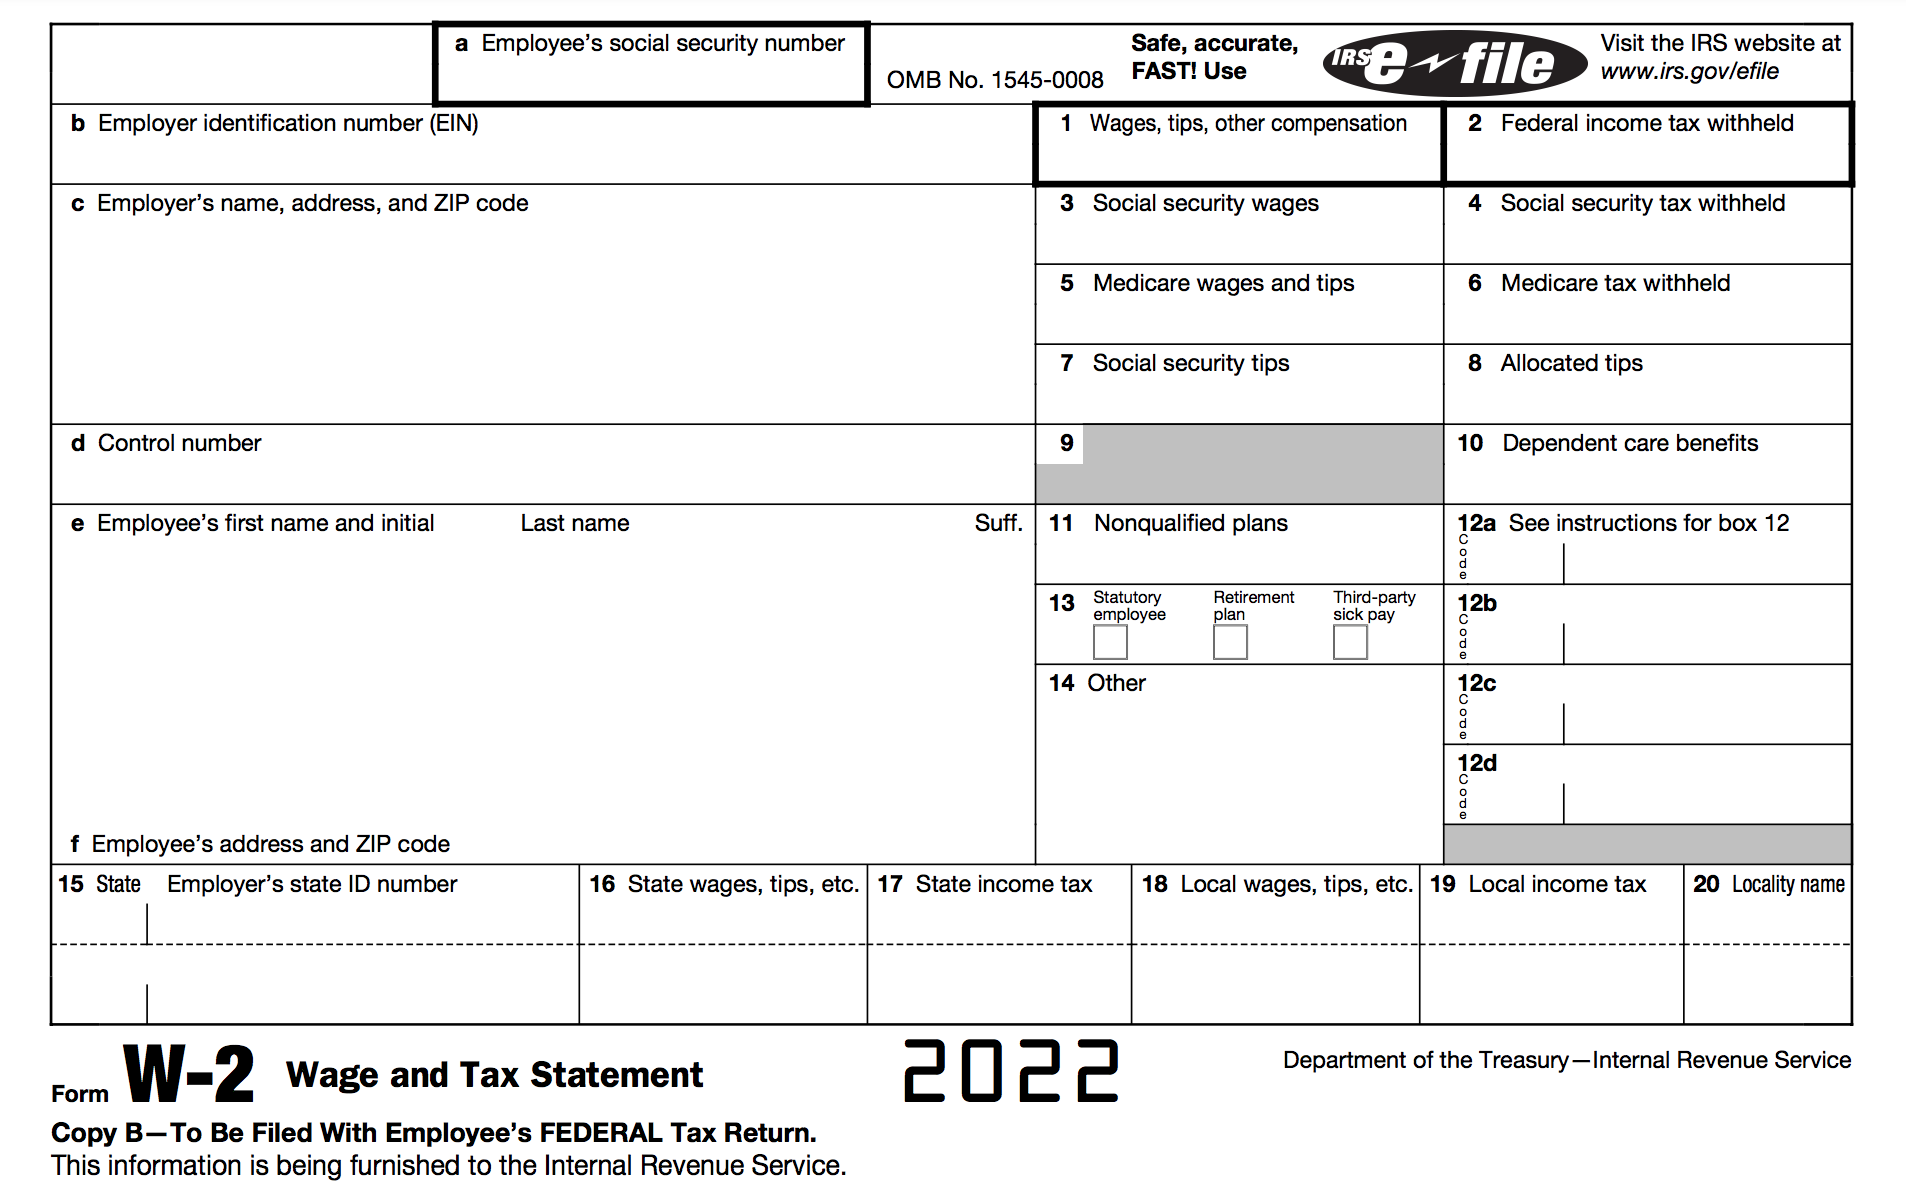 How To Fill Out A W-2 Tax Form | Smartasset throughout How To Fill Out Your W2 Form